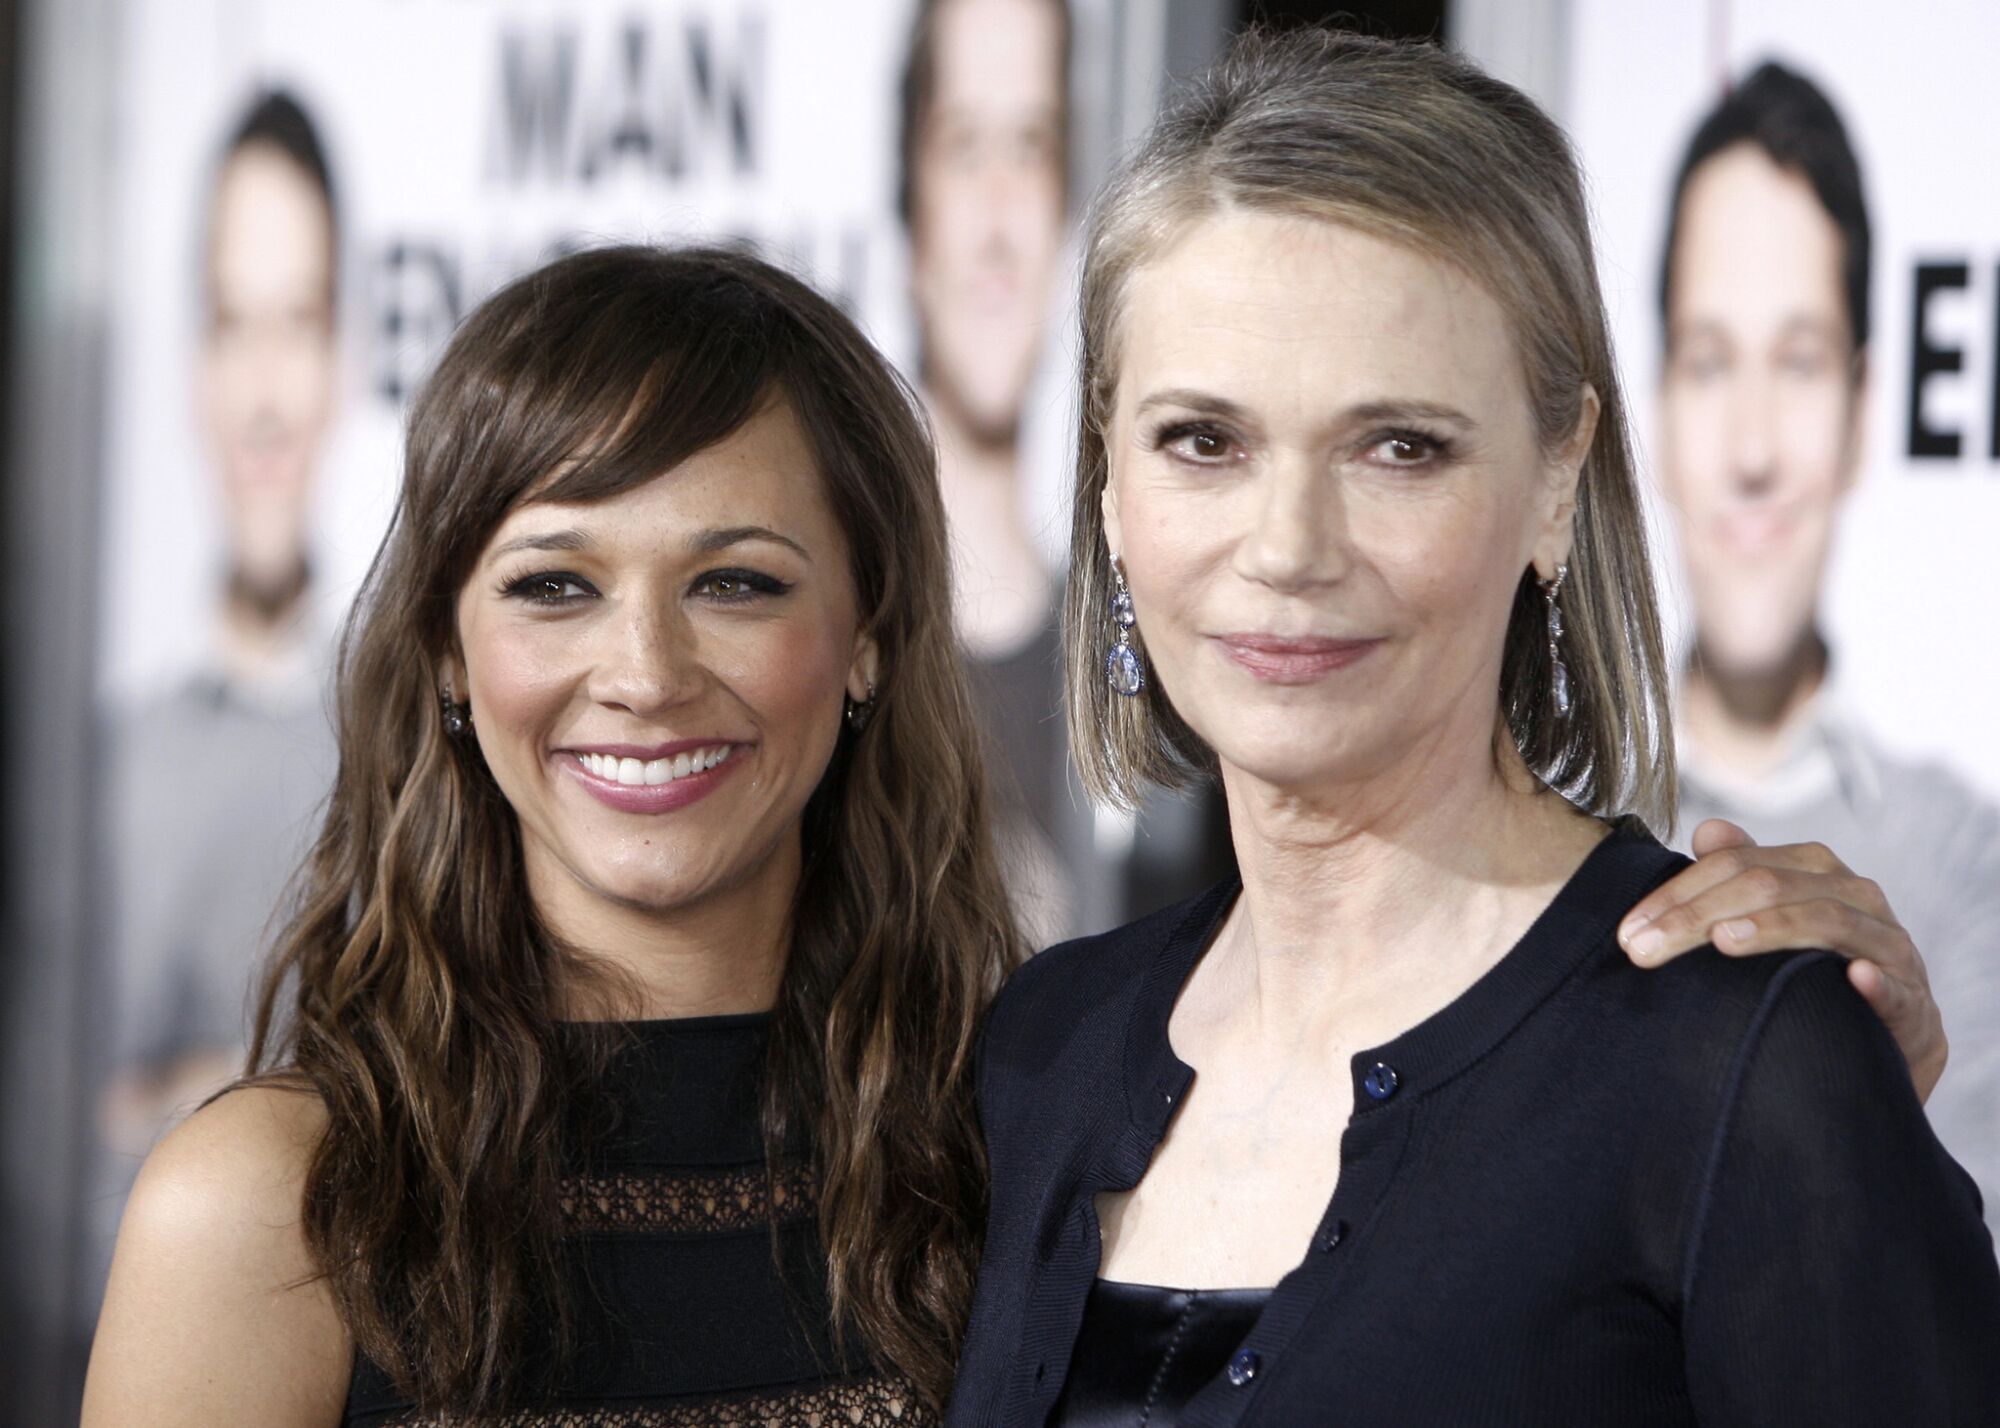 Rashida Jones, left, and her mom, actress Peggy Lipton, at the premiere of "I Love You, Man" in Los Angeles in 2009.